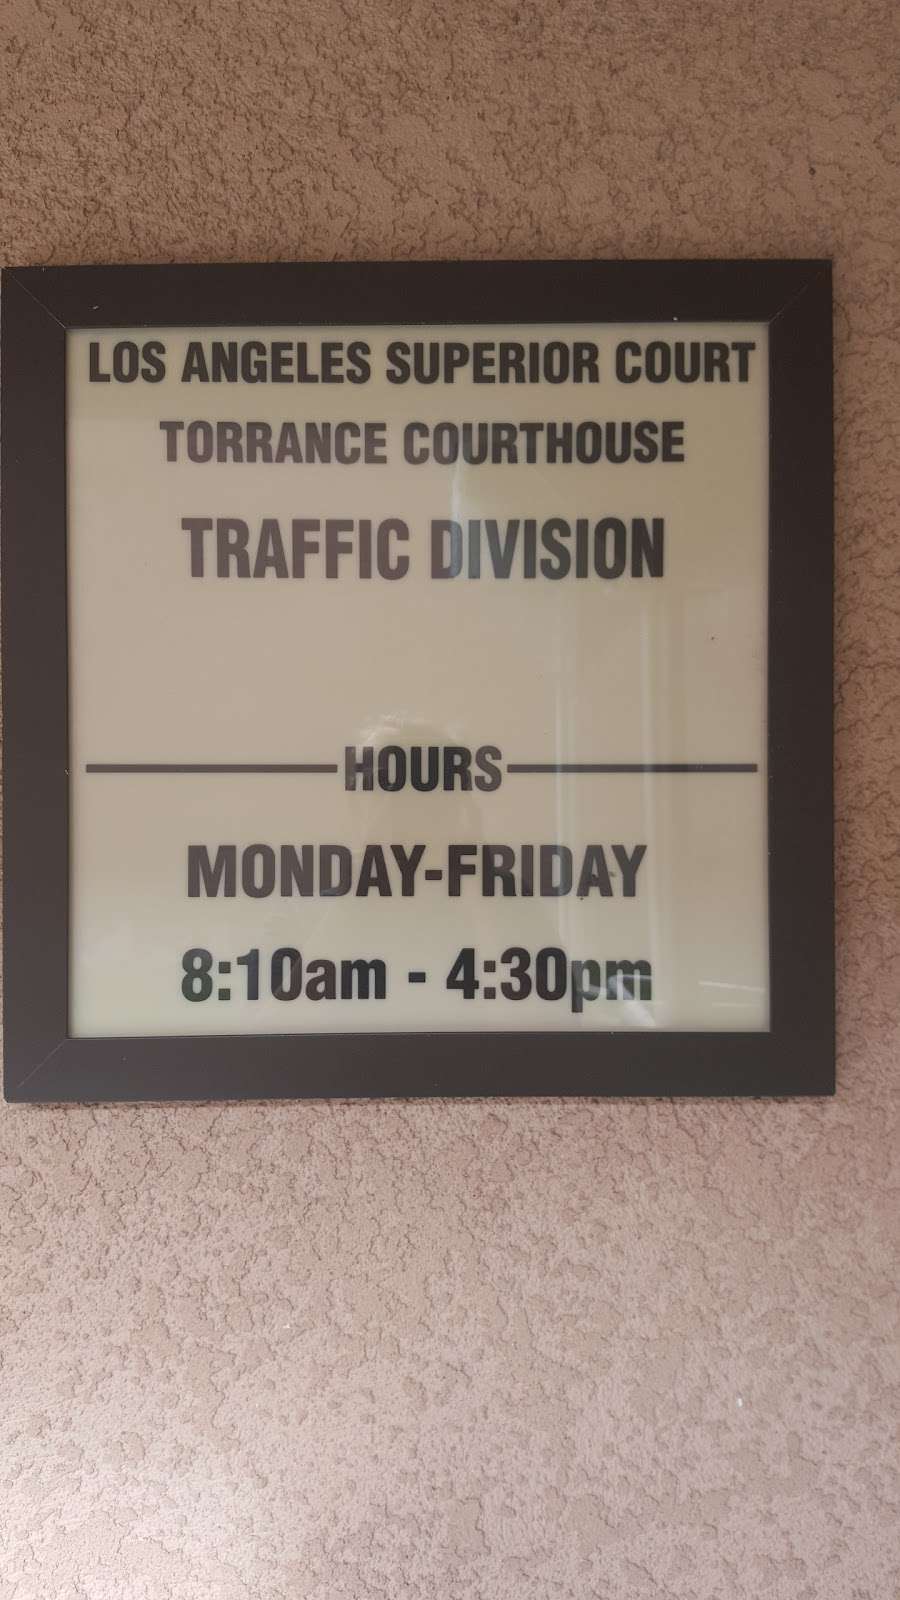 Torrance Courthouse | 825 Maple Ave, Torrance, CA 90503 | Phone: (310) 787-3700